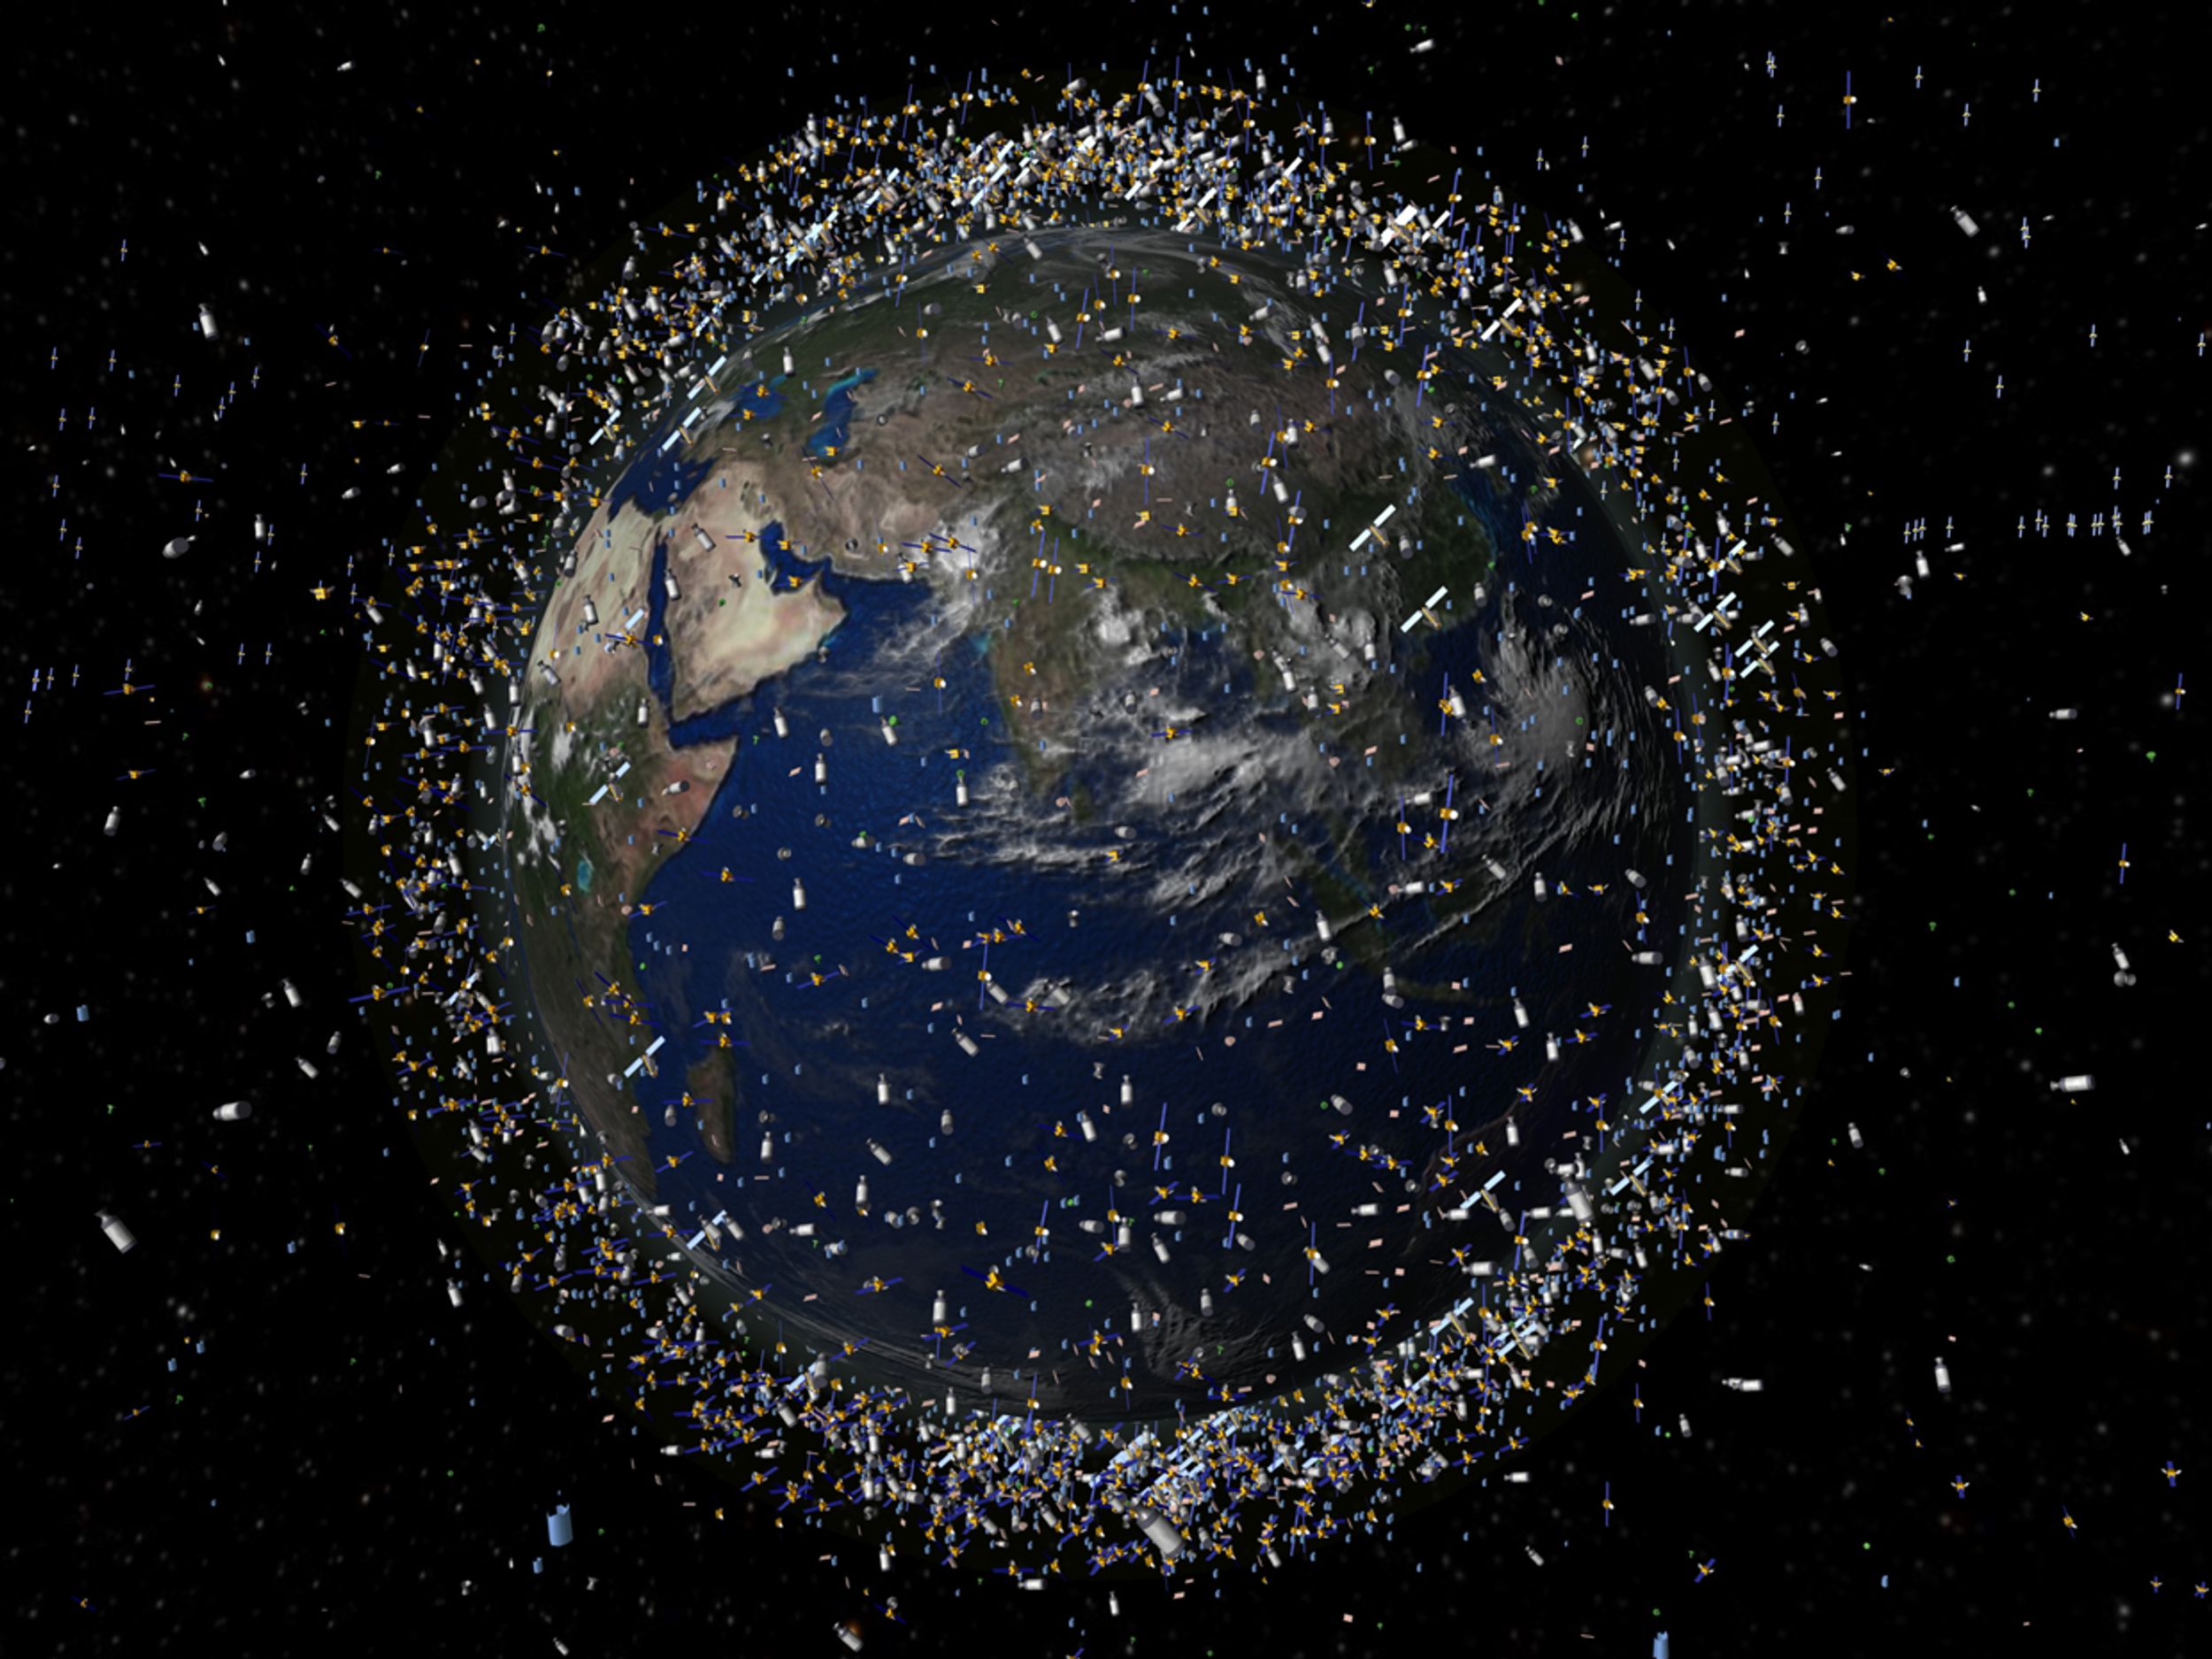 image of Earth from space showing orbital debris